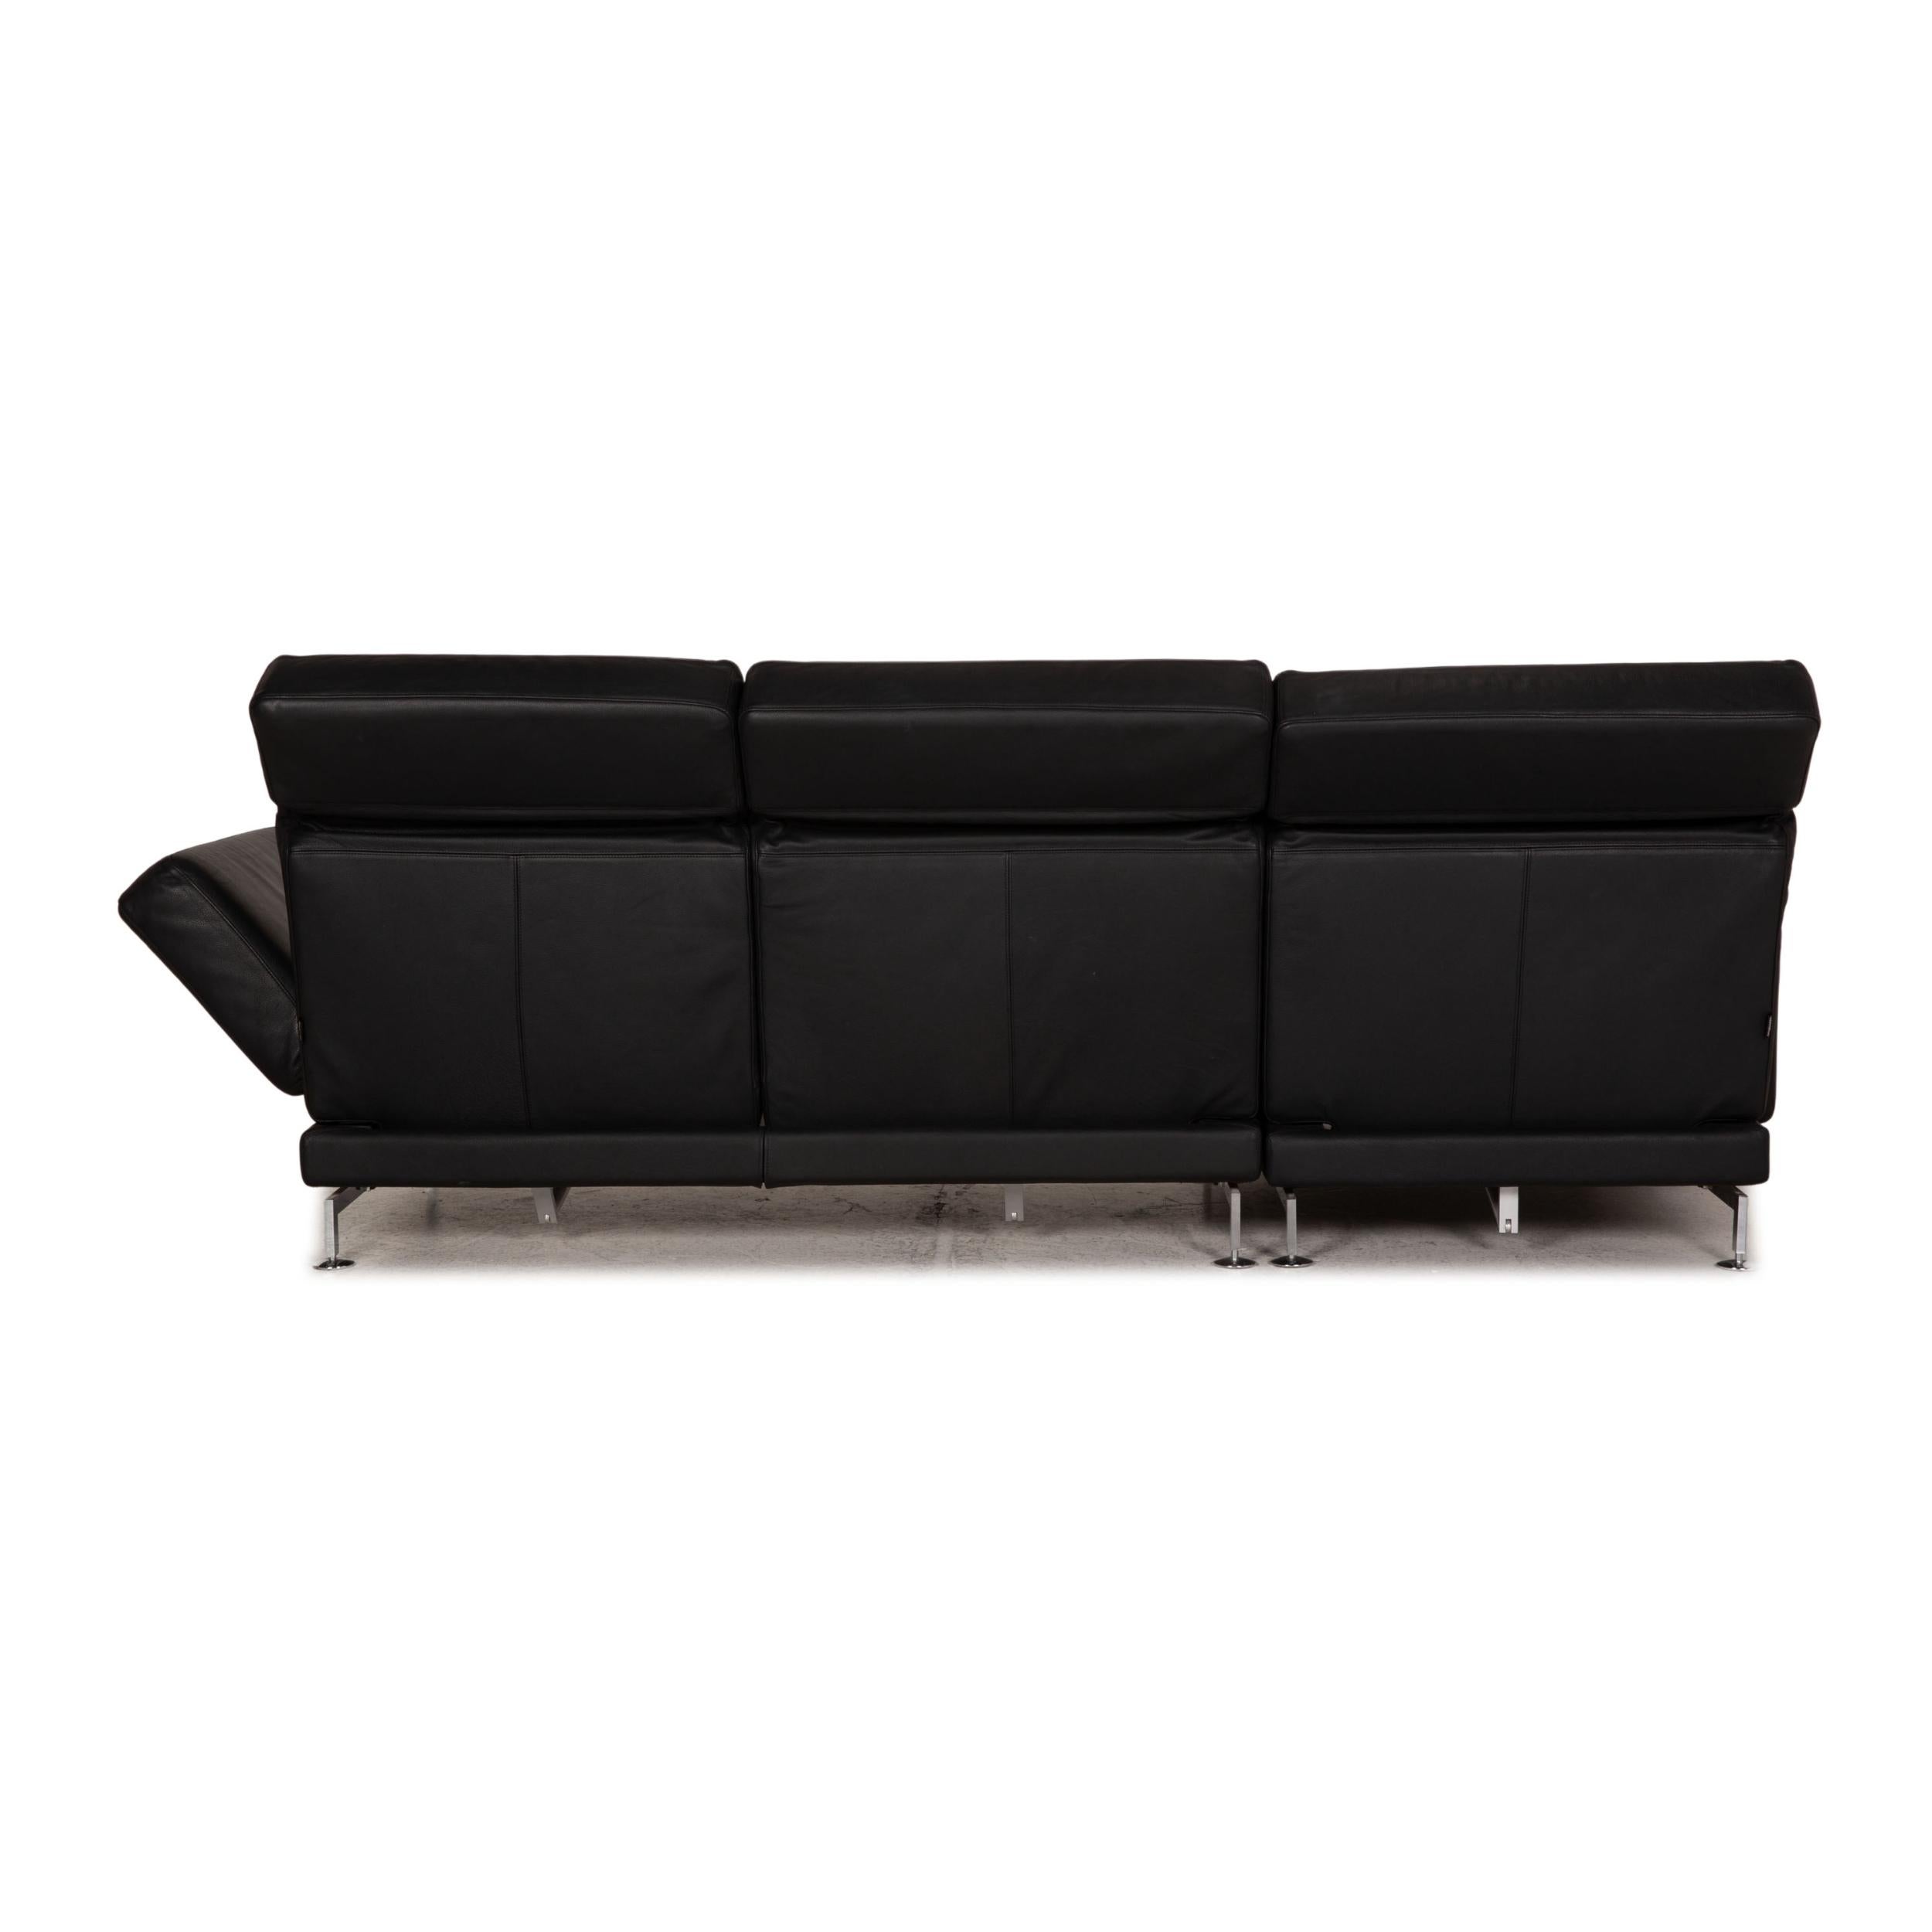 Brühl & Sippold Moule Leather Sofa Black Corner Sofa Couch Function For Sale 5